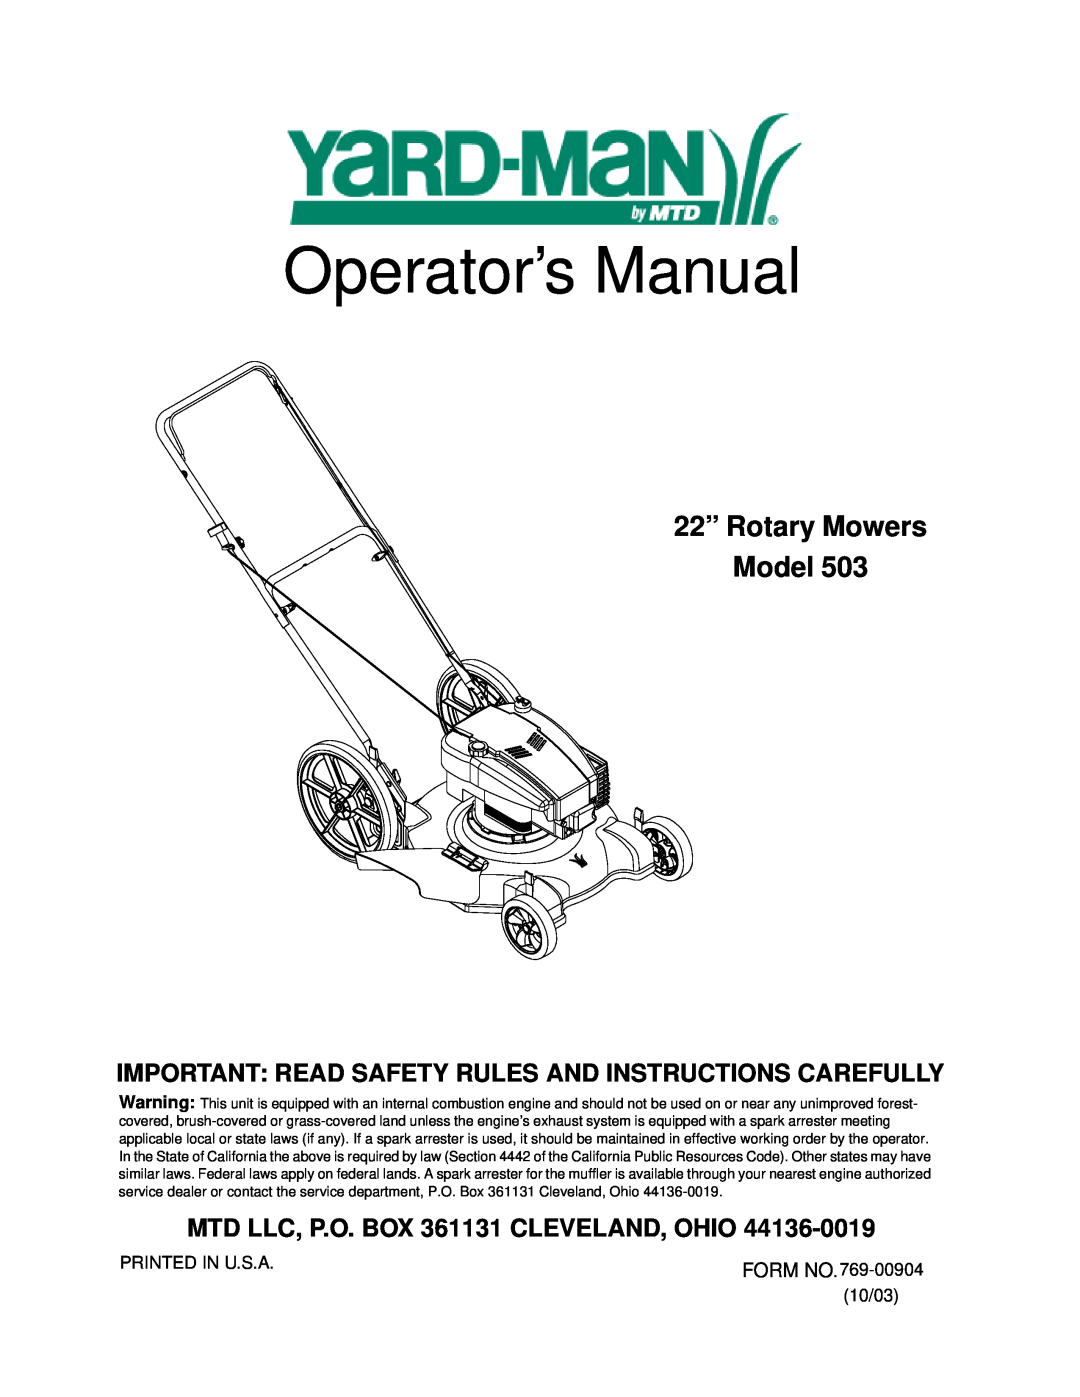 Yard-Man 503 manual Operator’s Manual, 22” Rotary Mowers Model, Important Read Safety Rules And Instructions Carefully 